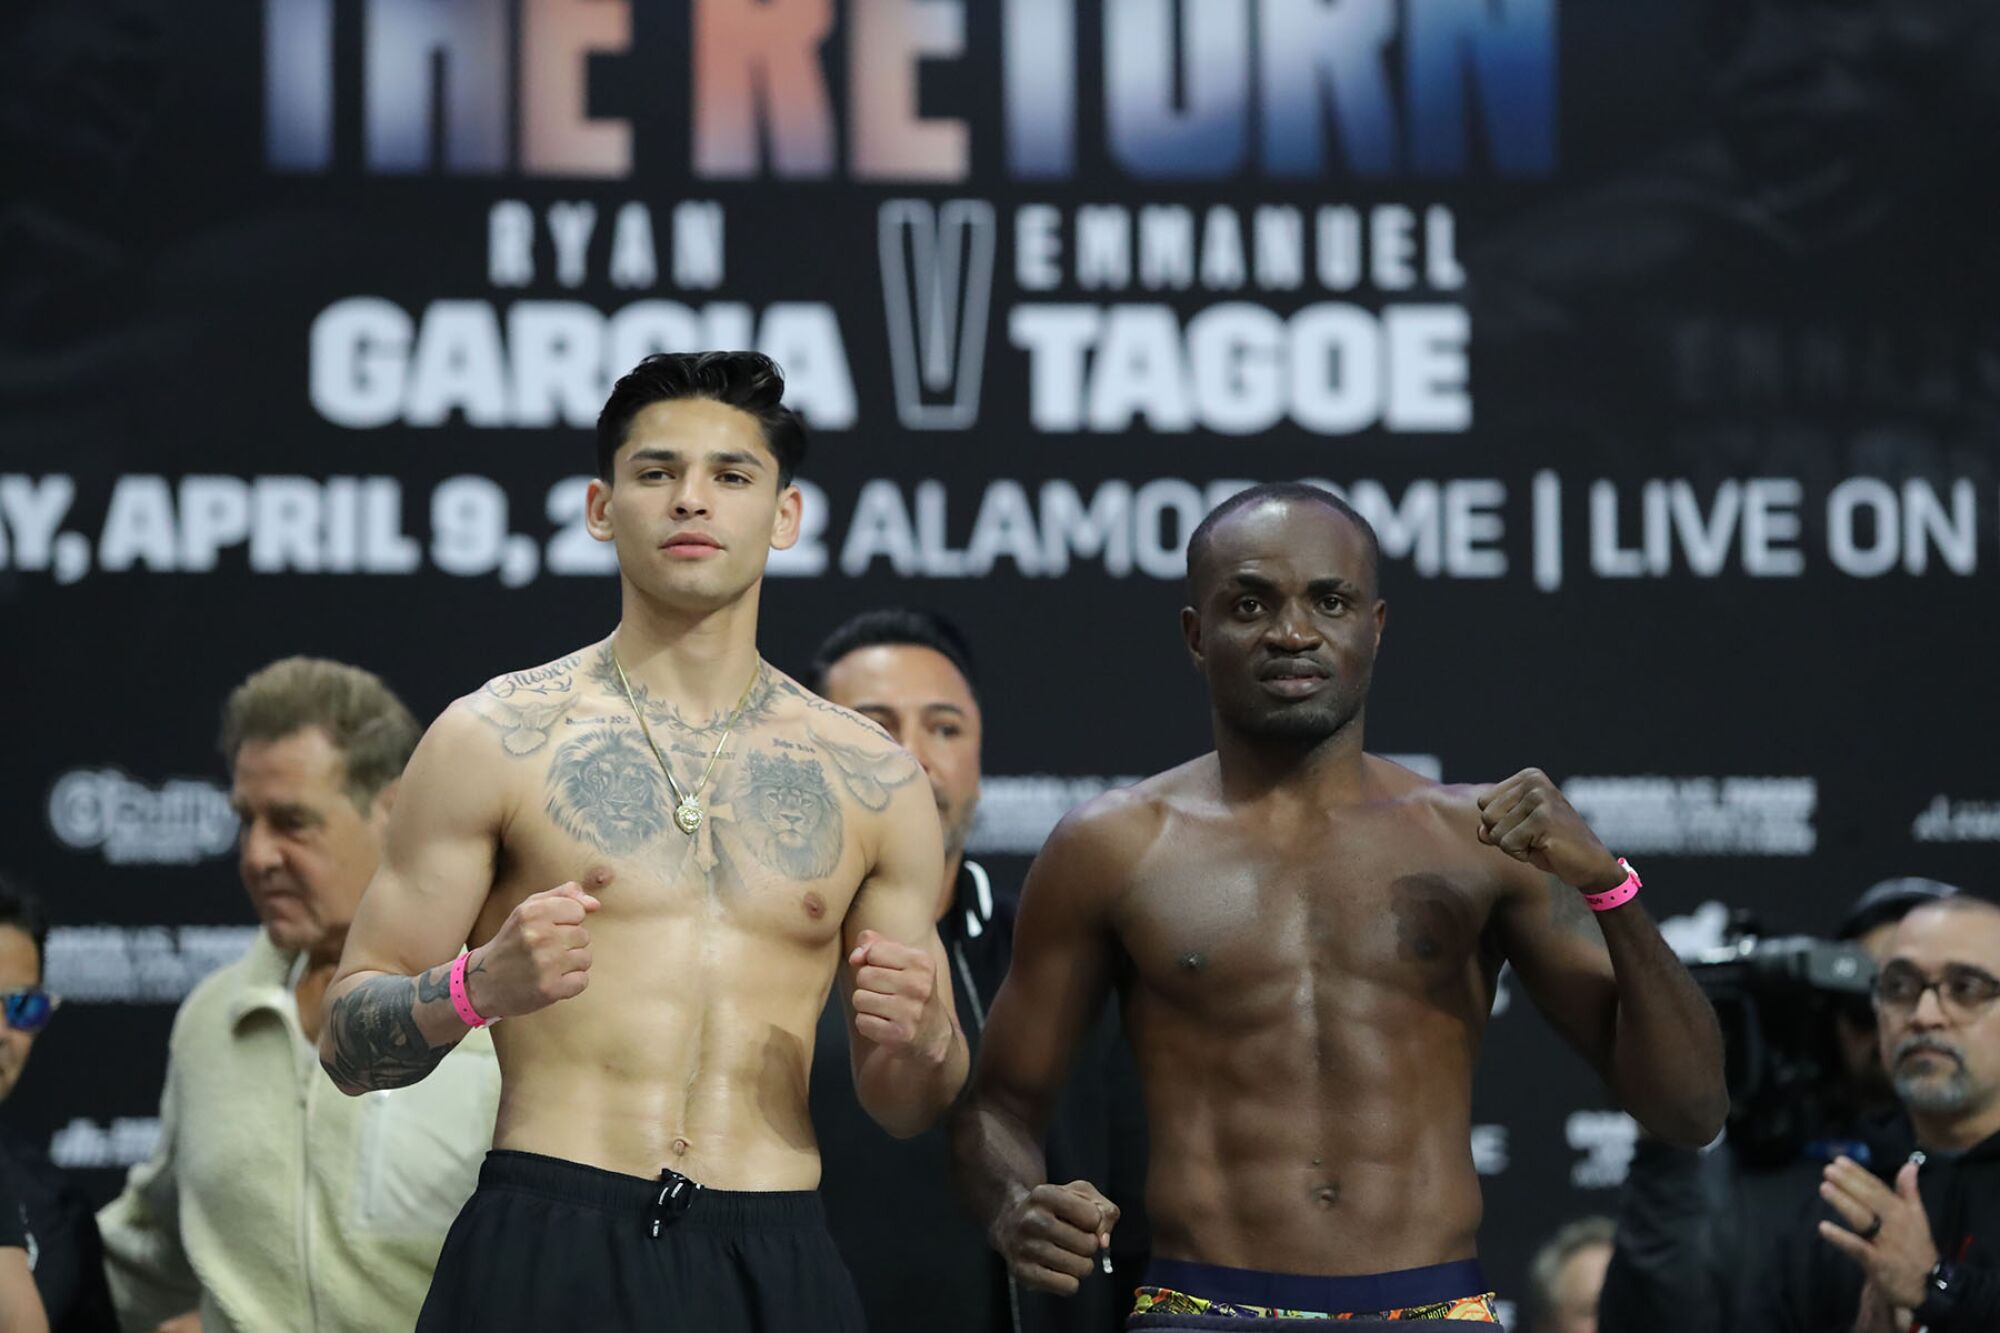 Ryan Garcia and Emannuel Tagoe face a crowd and hold up their fists.